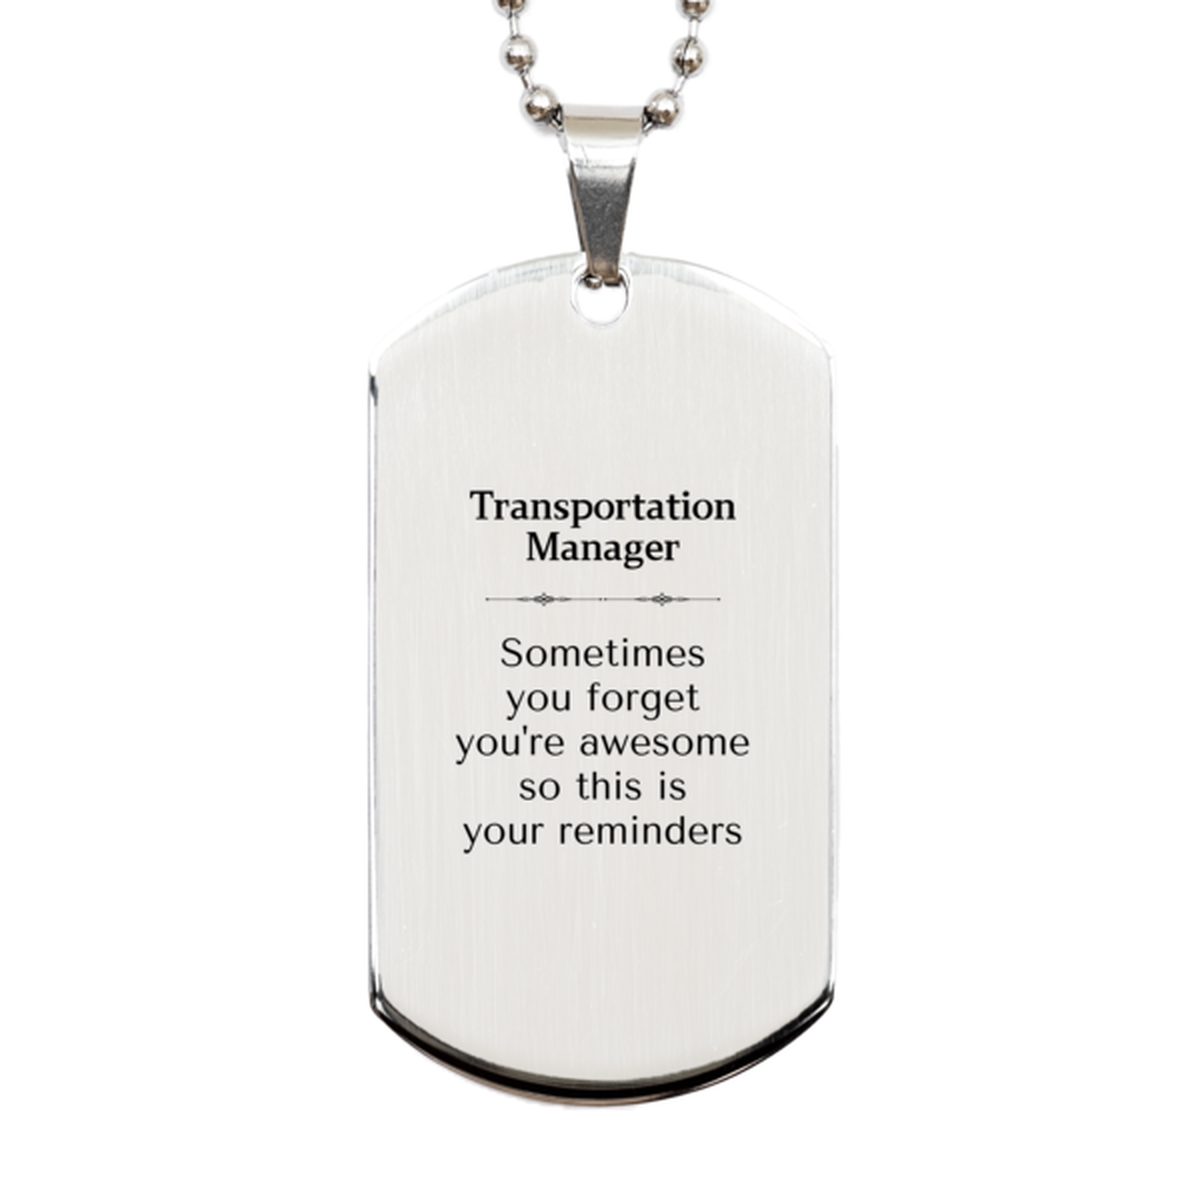 Sentimental Transportation Manager Silver Dog Tag, Transportation Manager Sometimes you forget you're awesome so this is your reminders, Graduation Christmas Birthday Gifts for Transportation Manager, Men, Women, Coworkers